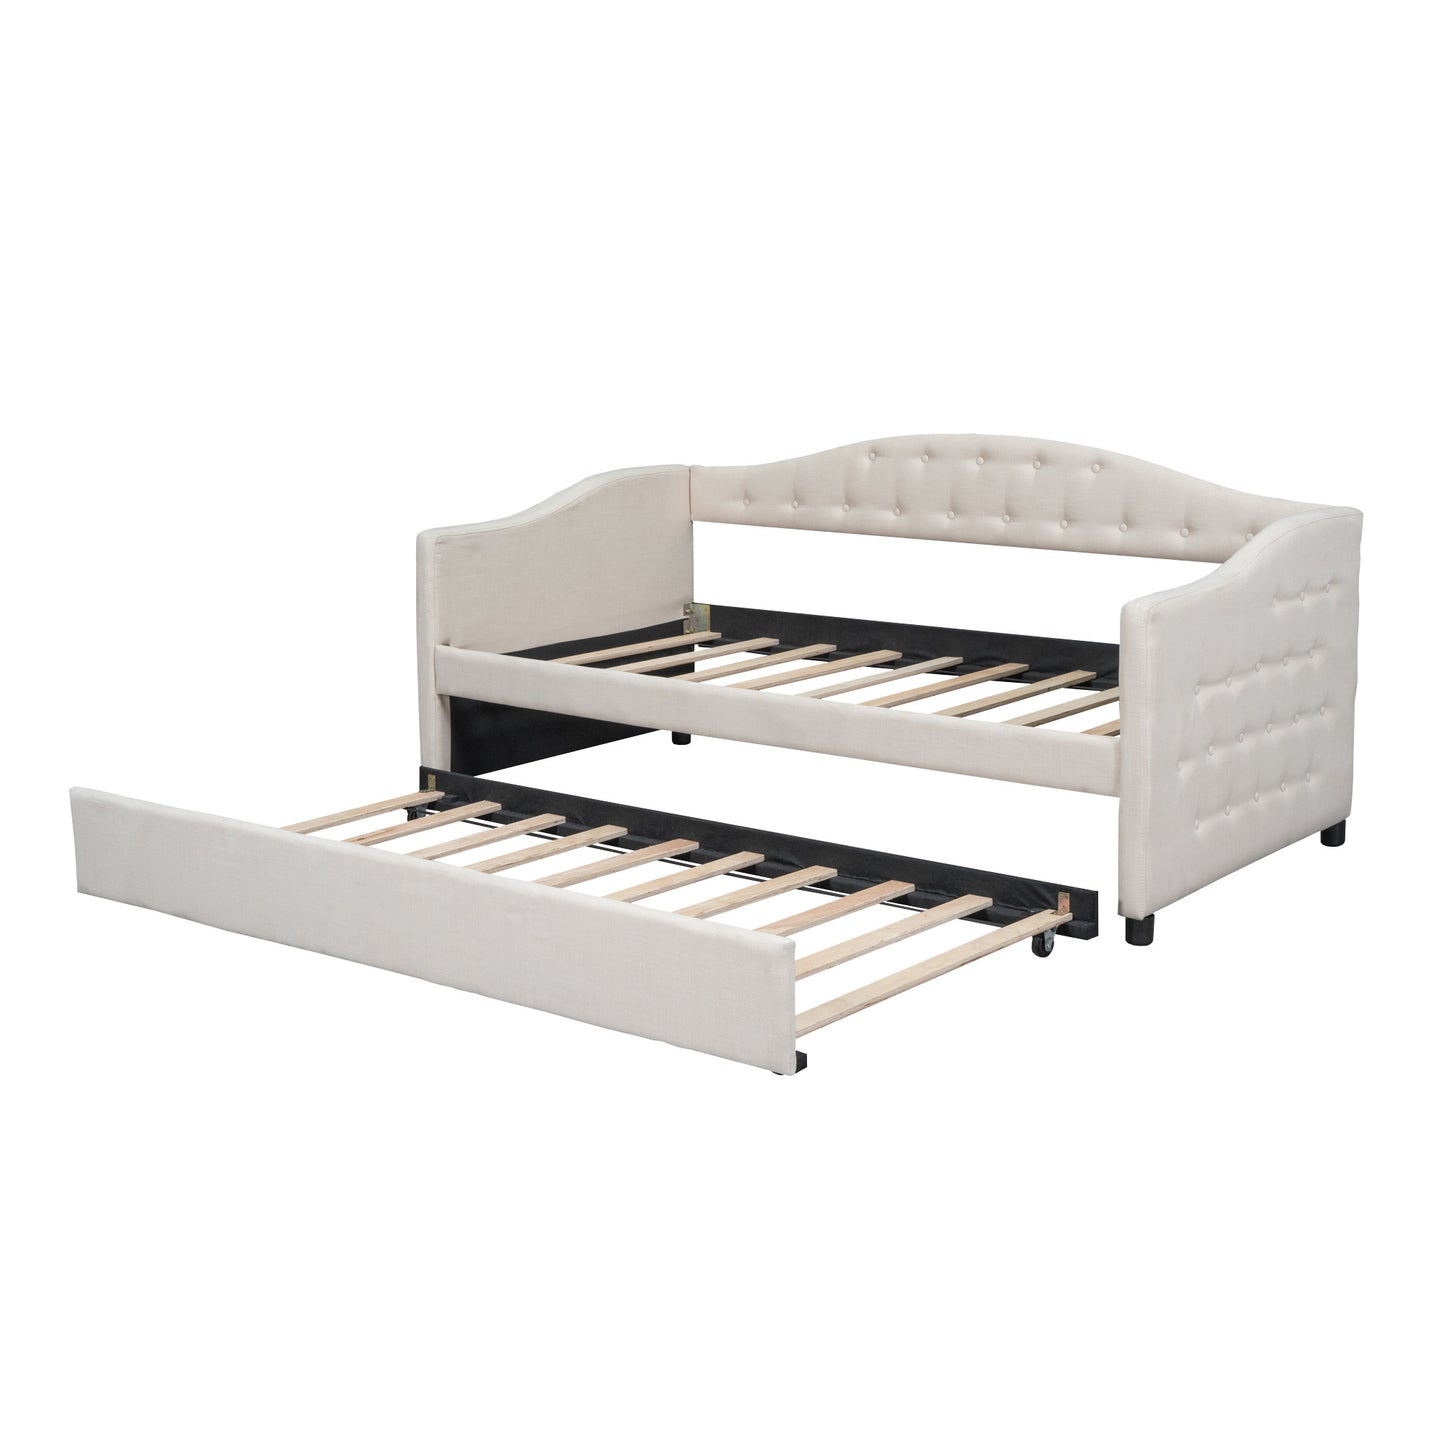 vogue upholstered bed with trundle, beige